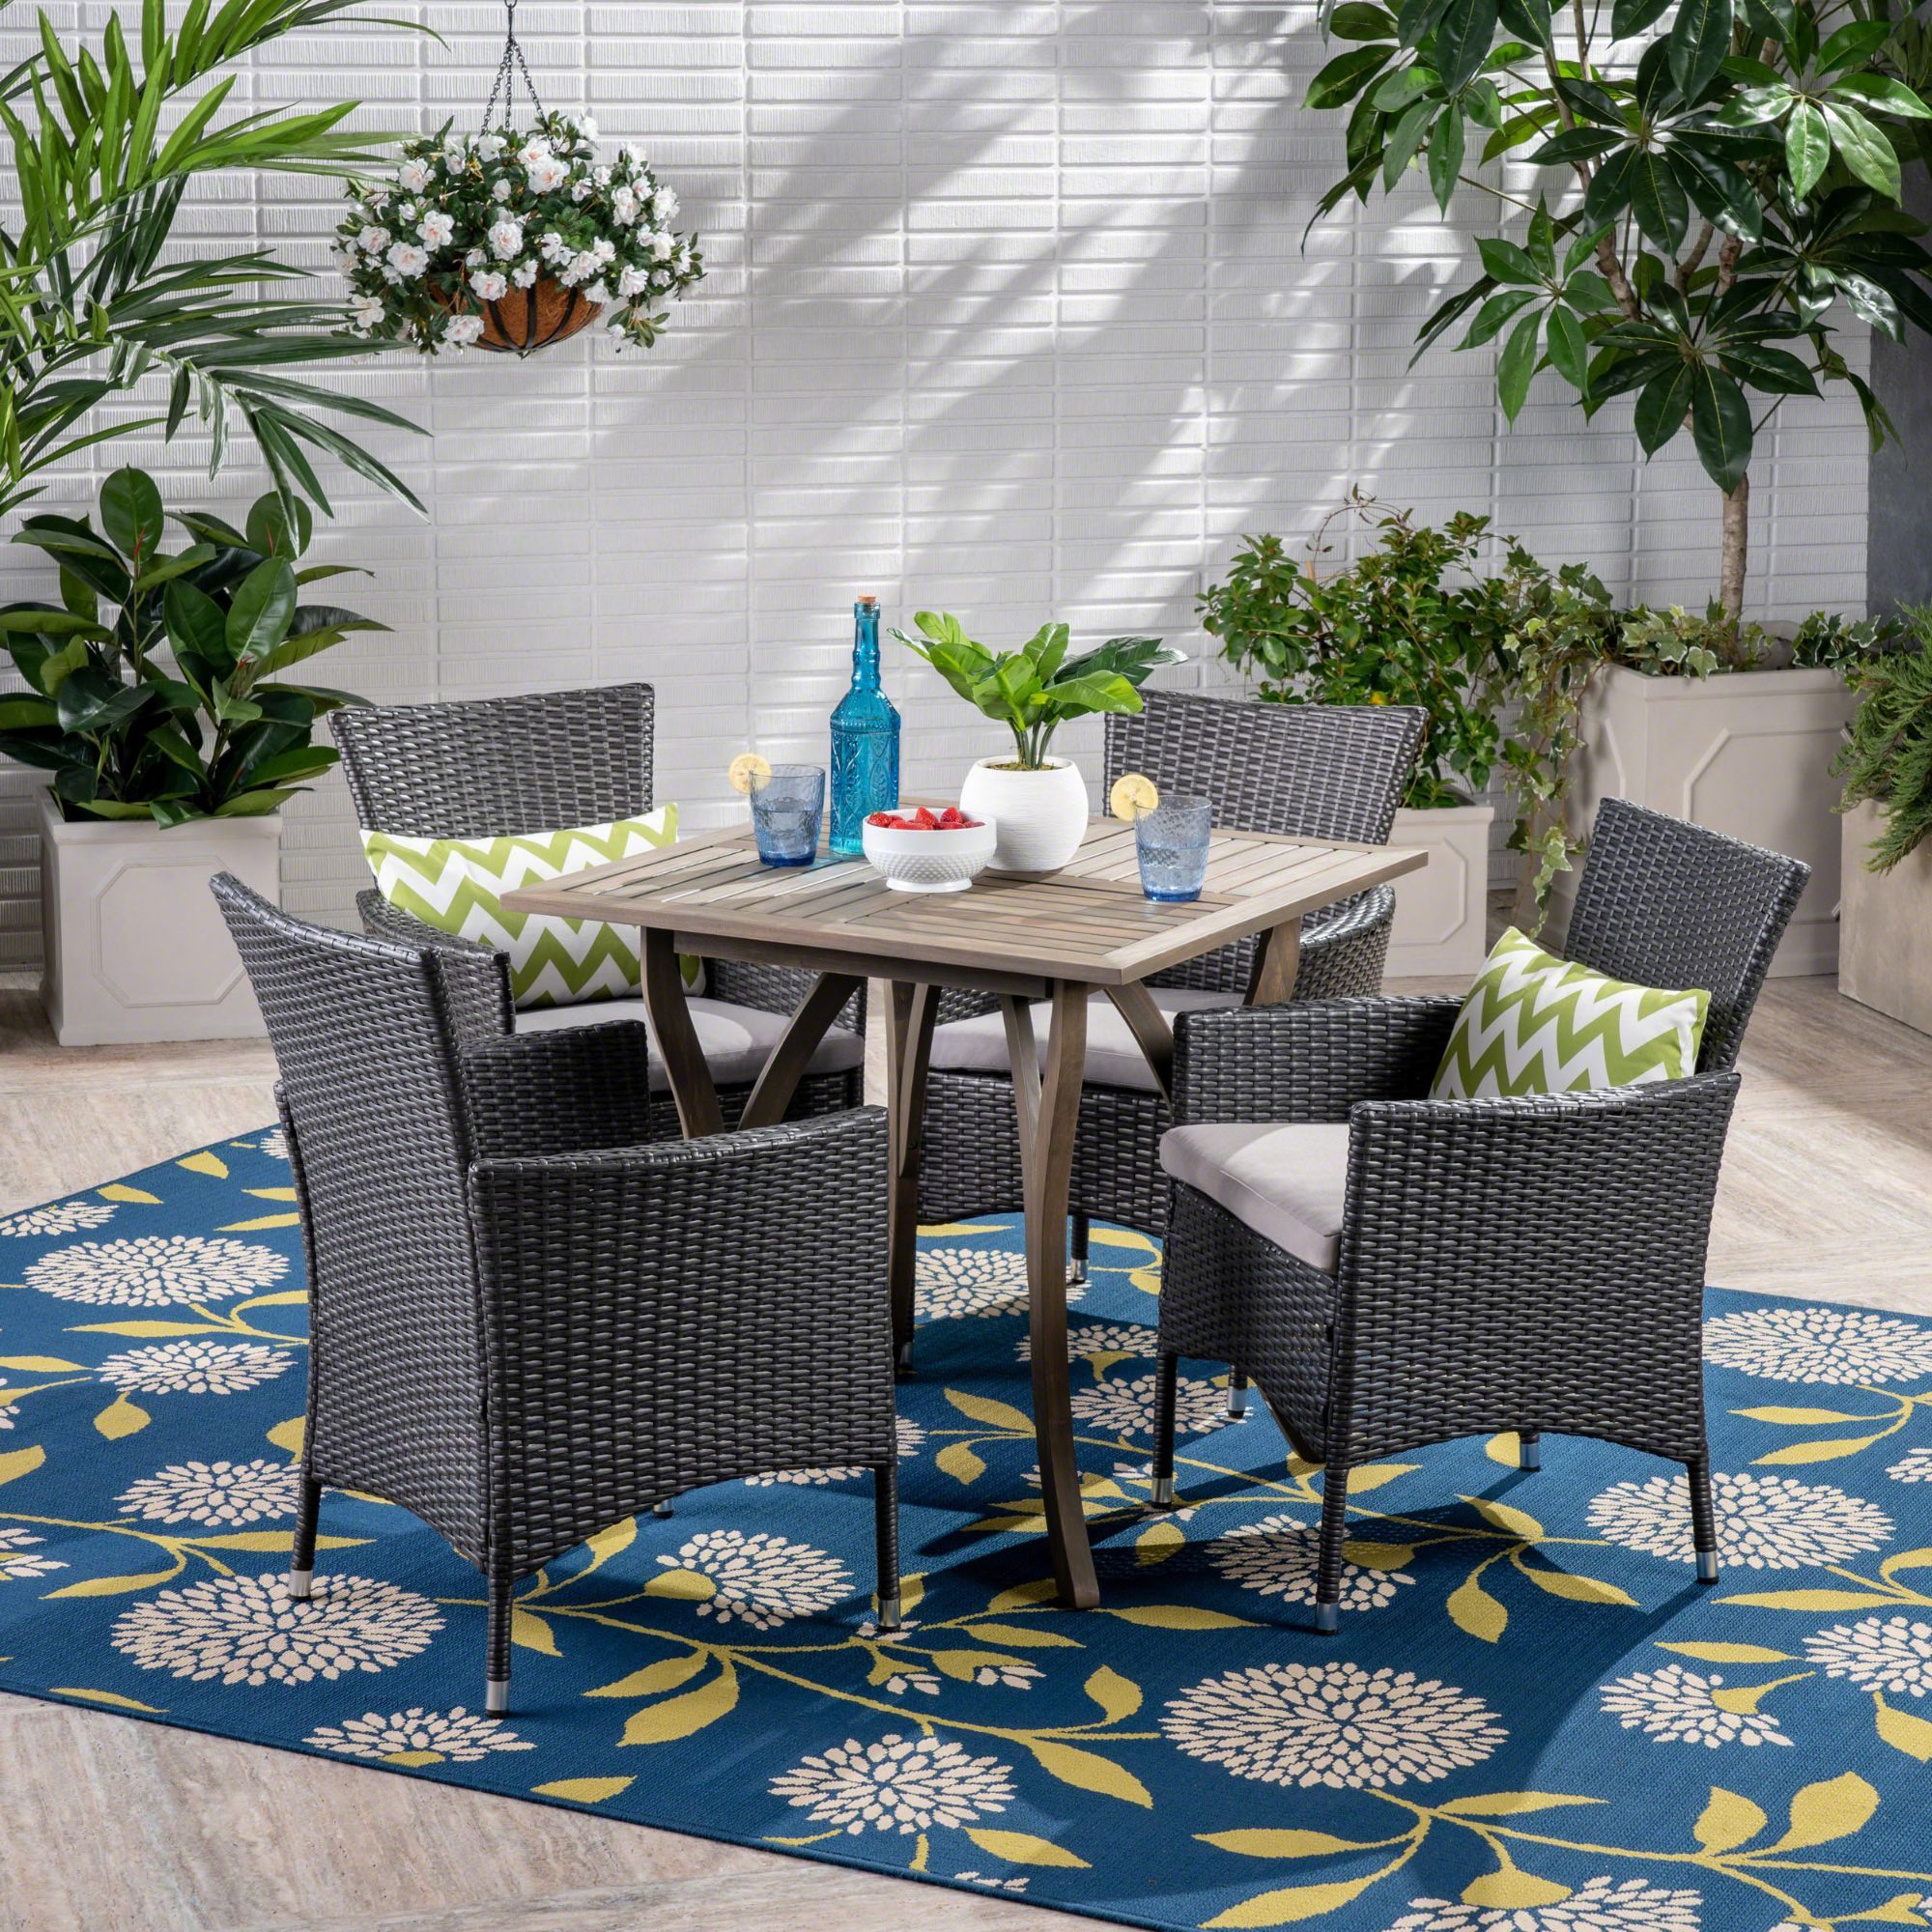 Outdoor Wicker Gray Cushion Patio Sets Throughout Current 5 Piece Gray Contemporary Wood And Wicker Outdoor Furniture Patio (View 11 of 15)